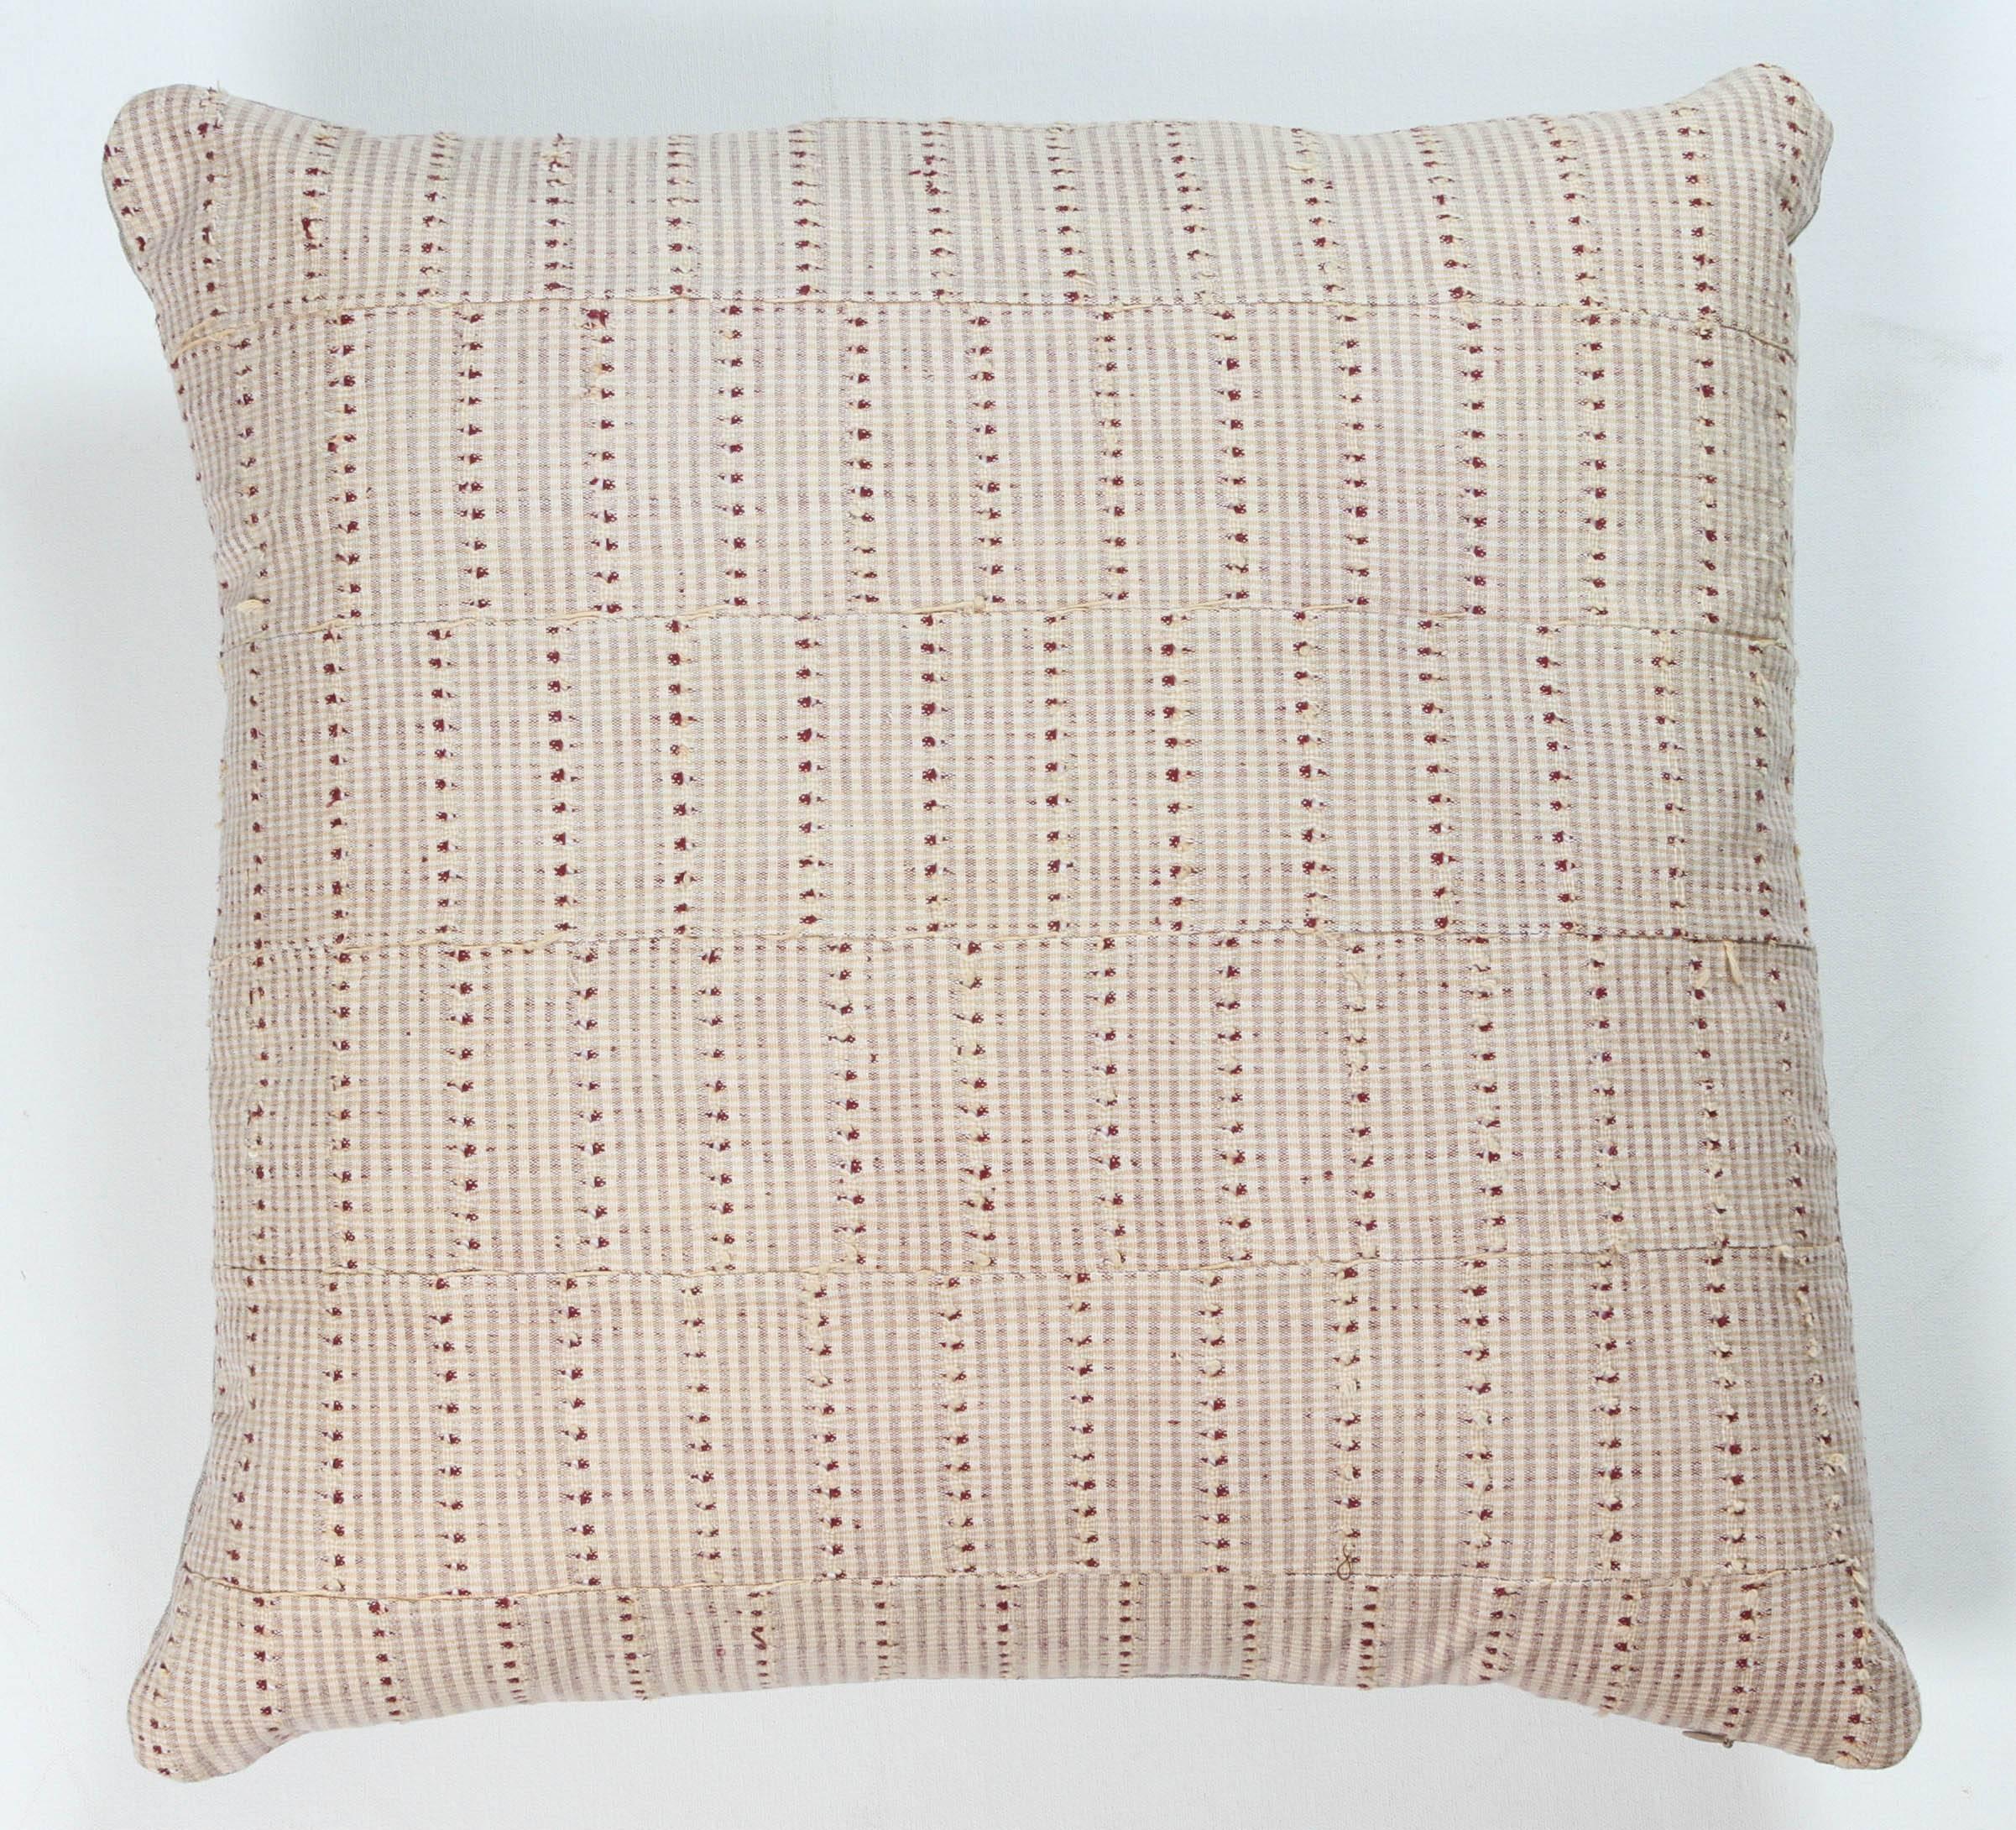 Embroidered Asoke African Textile Pillow For Sale